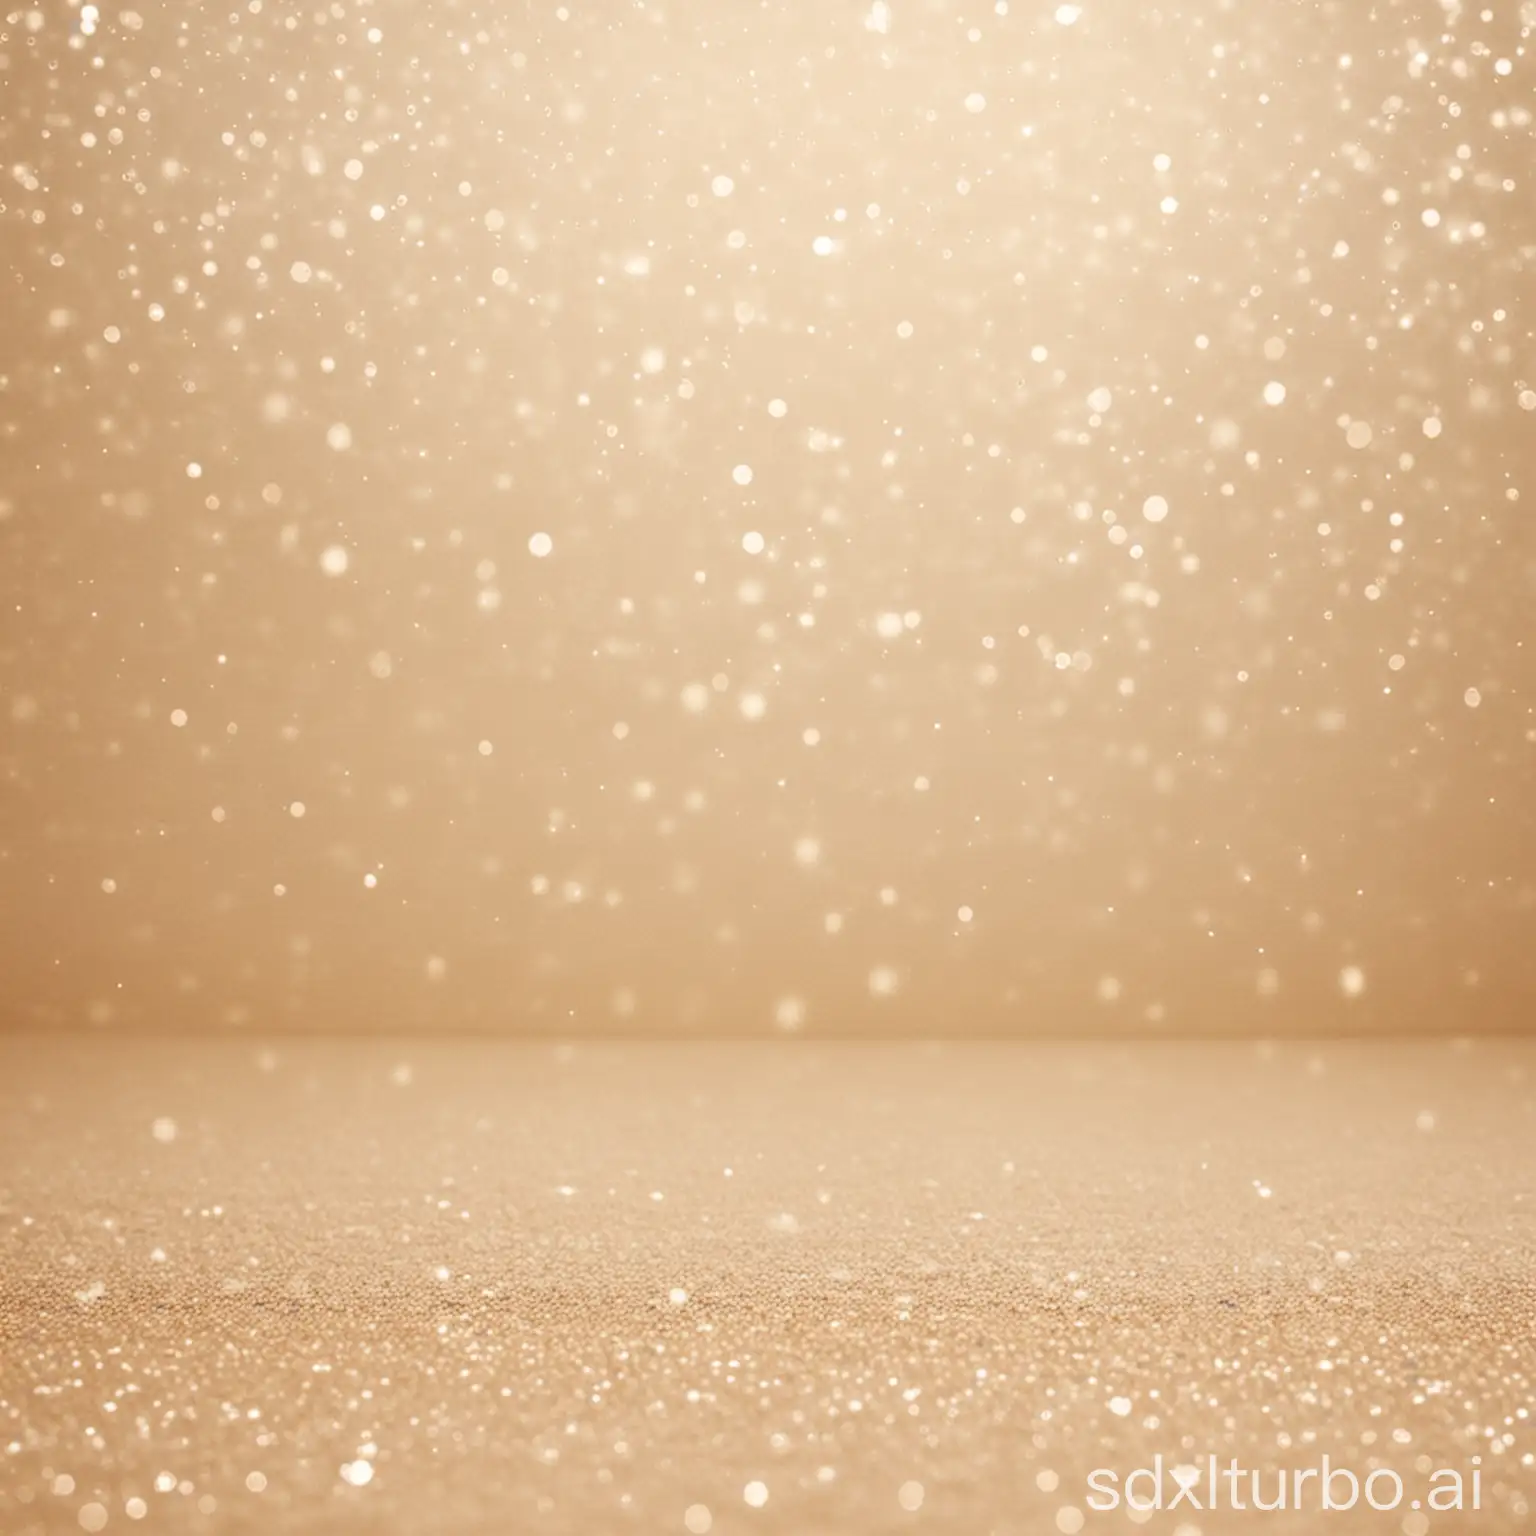 Soothing-Beige-Background-Bokeh-for-Relaxation-and-Minimalism